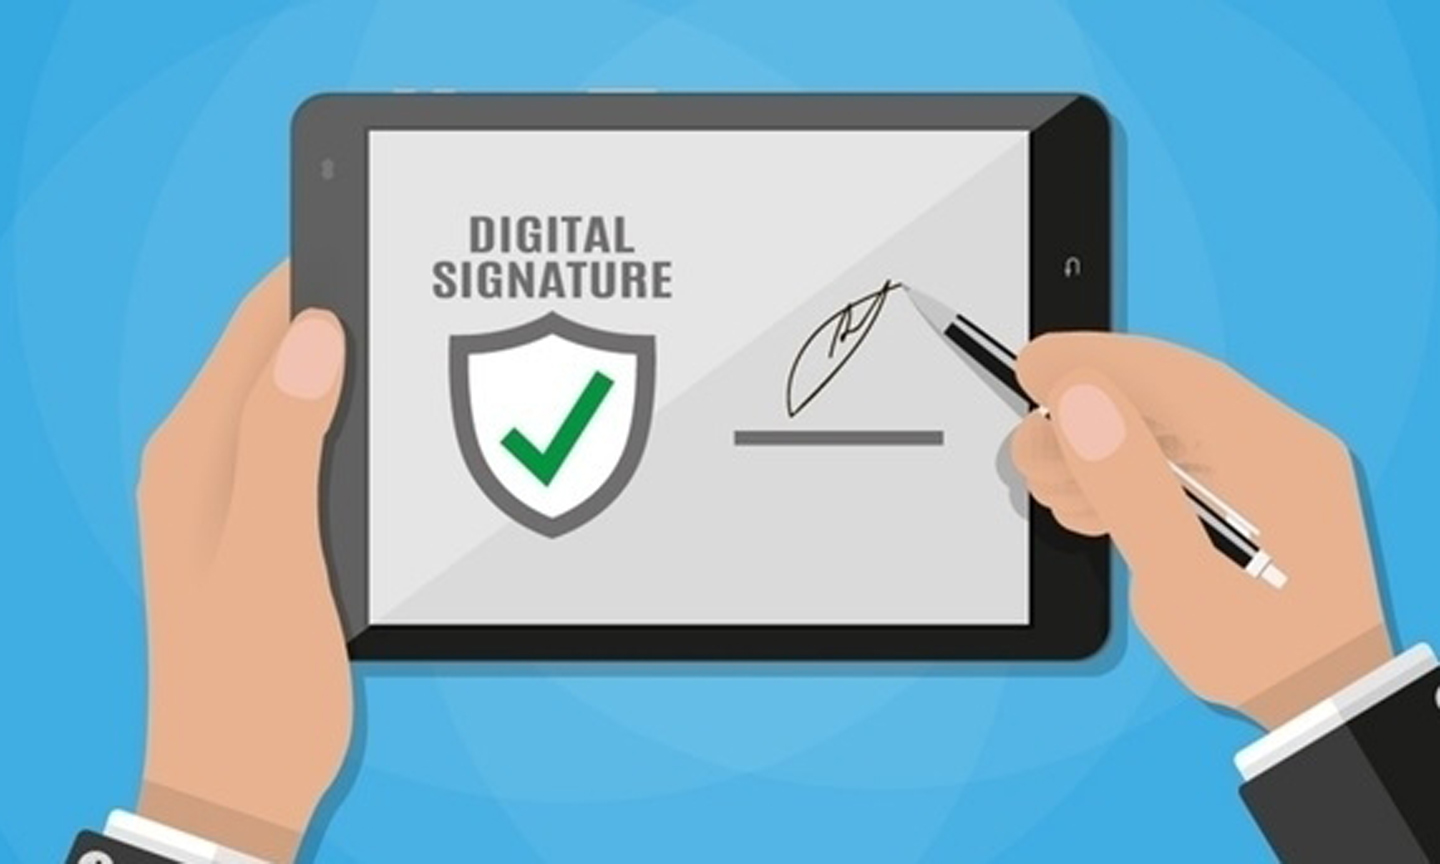  All electronic documents exchanged between government agencies must be signed digitally.